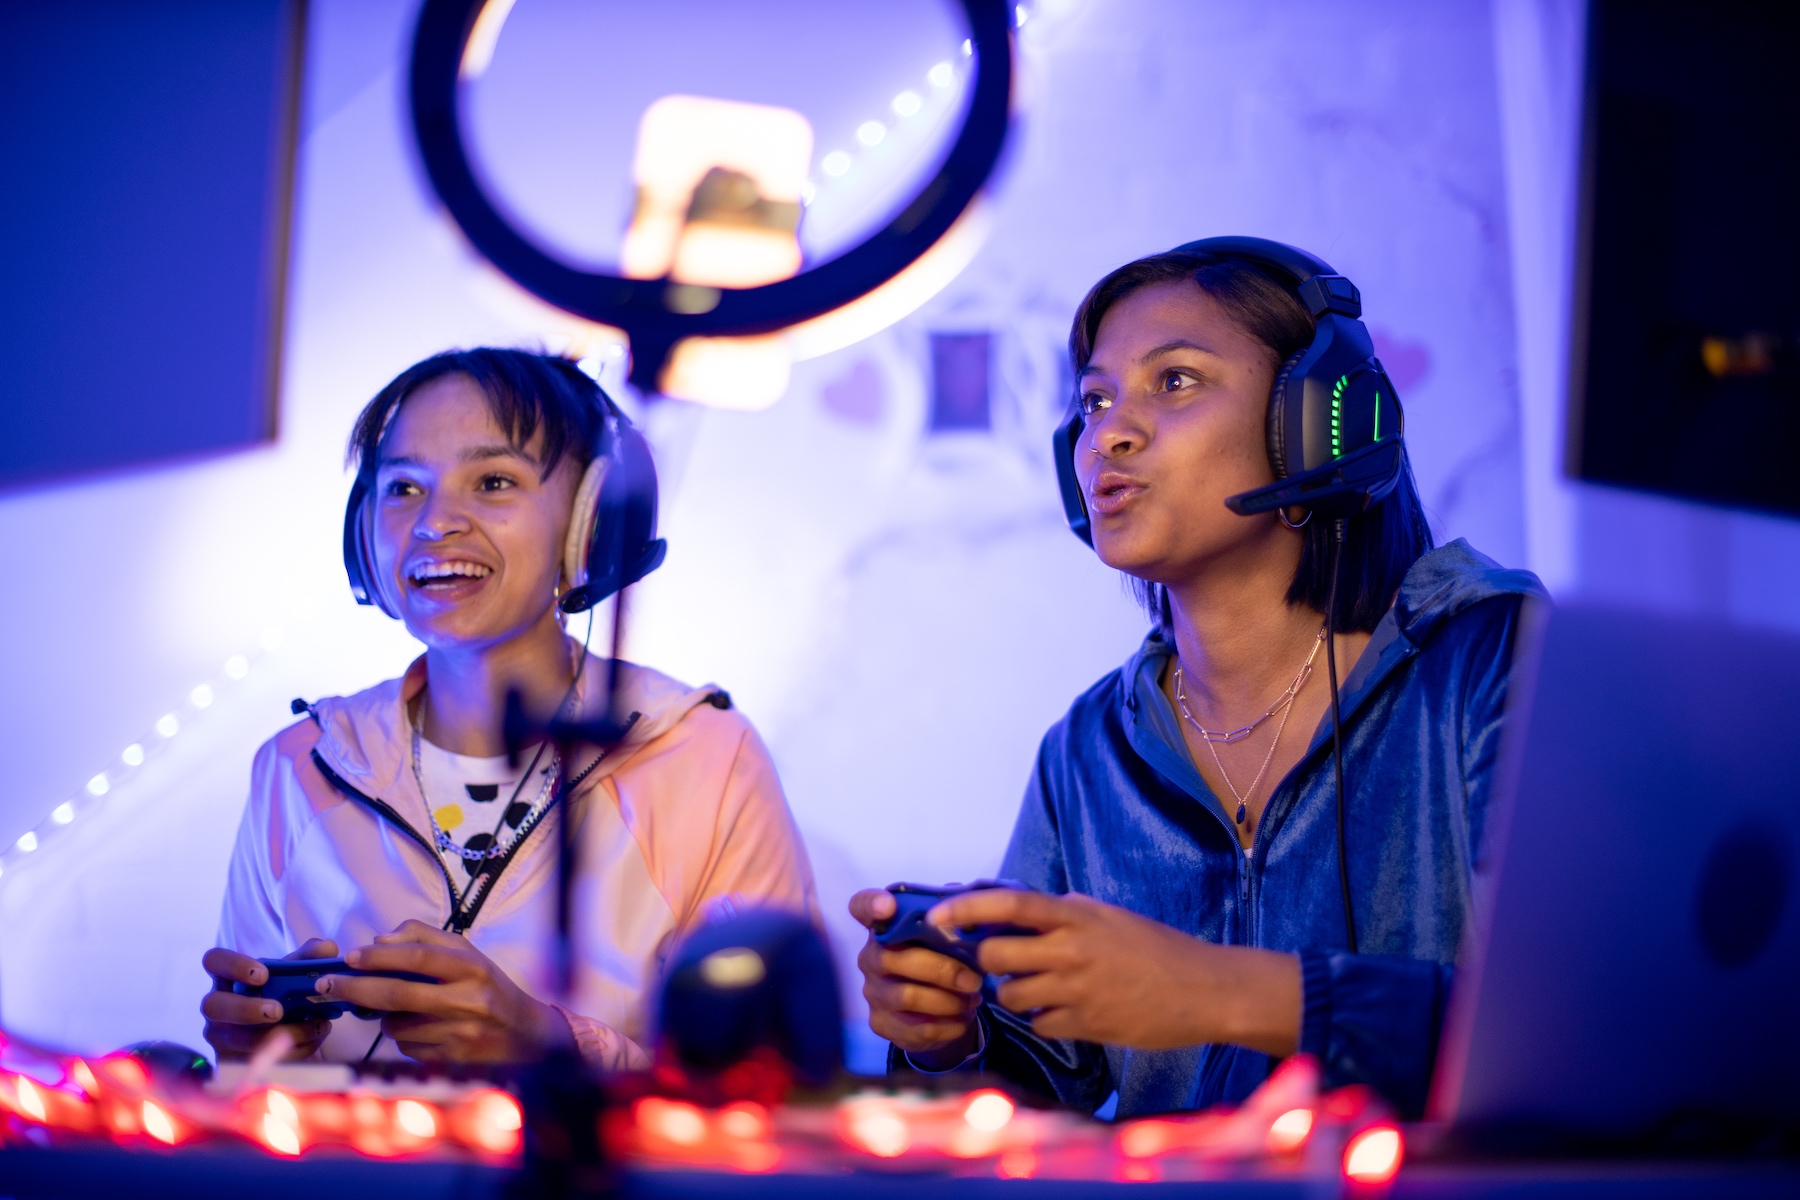 Two sisters play a video game together, each holding a controller and wearing a headset